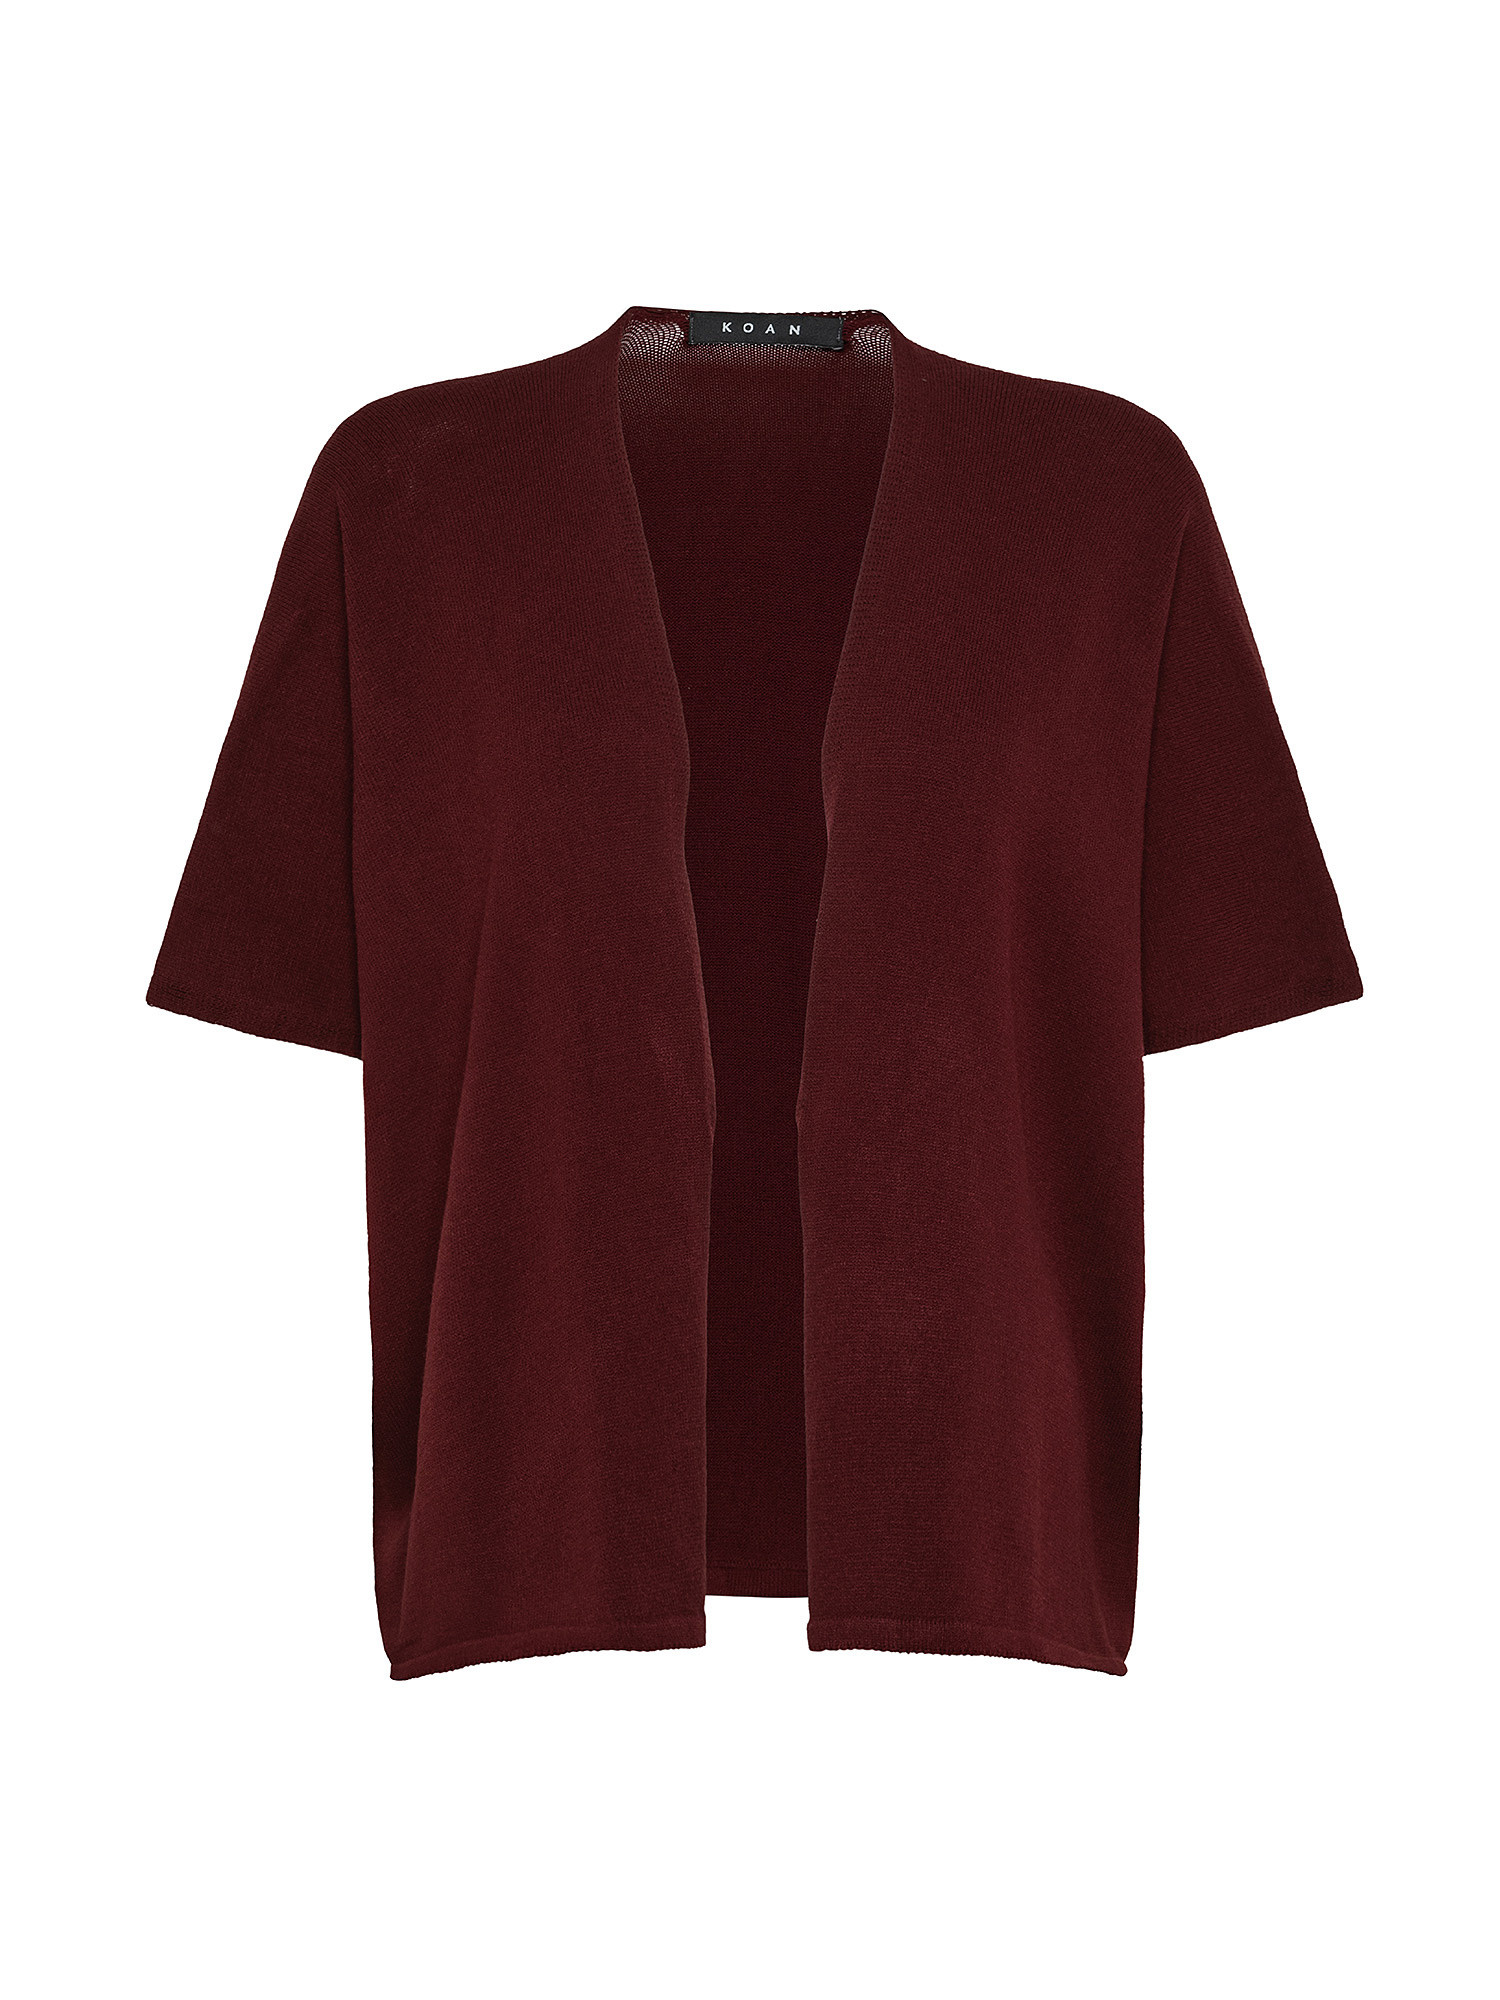 Cardigan, Rosso bordeaux, large image number 0